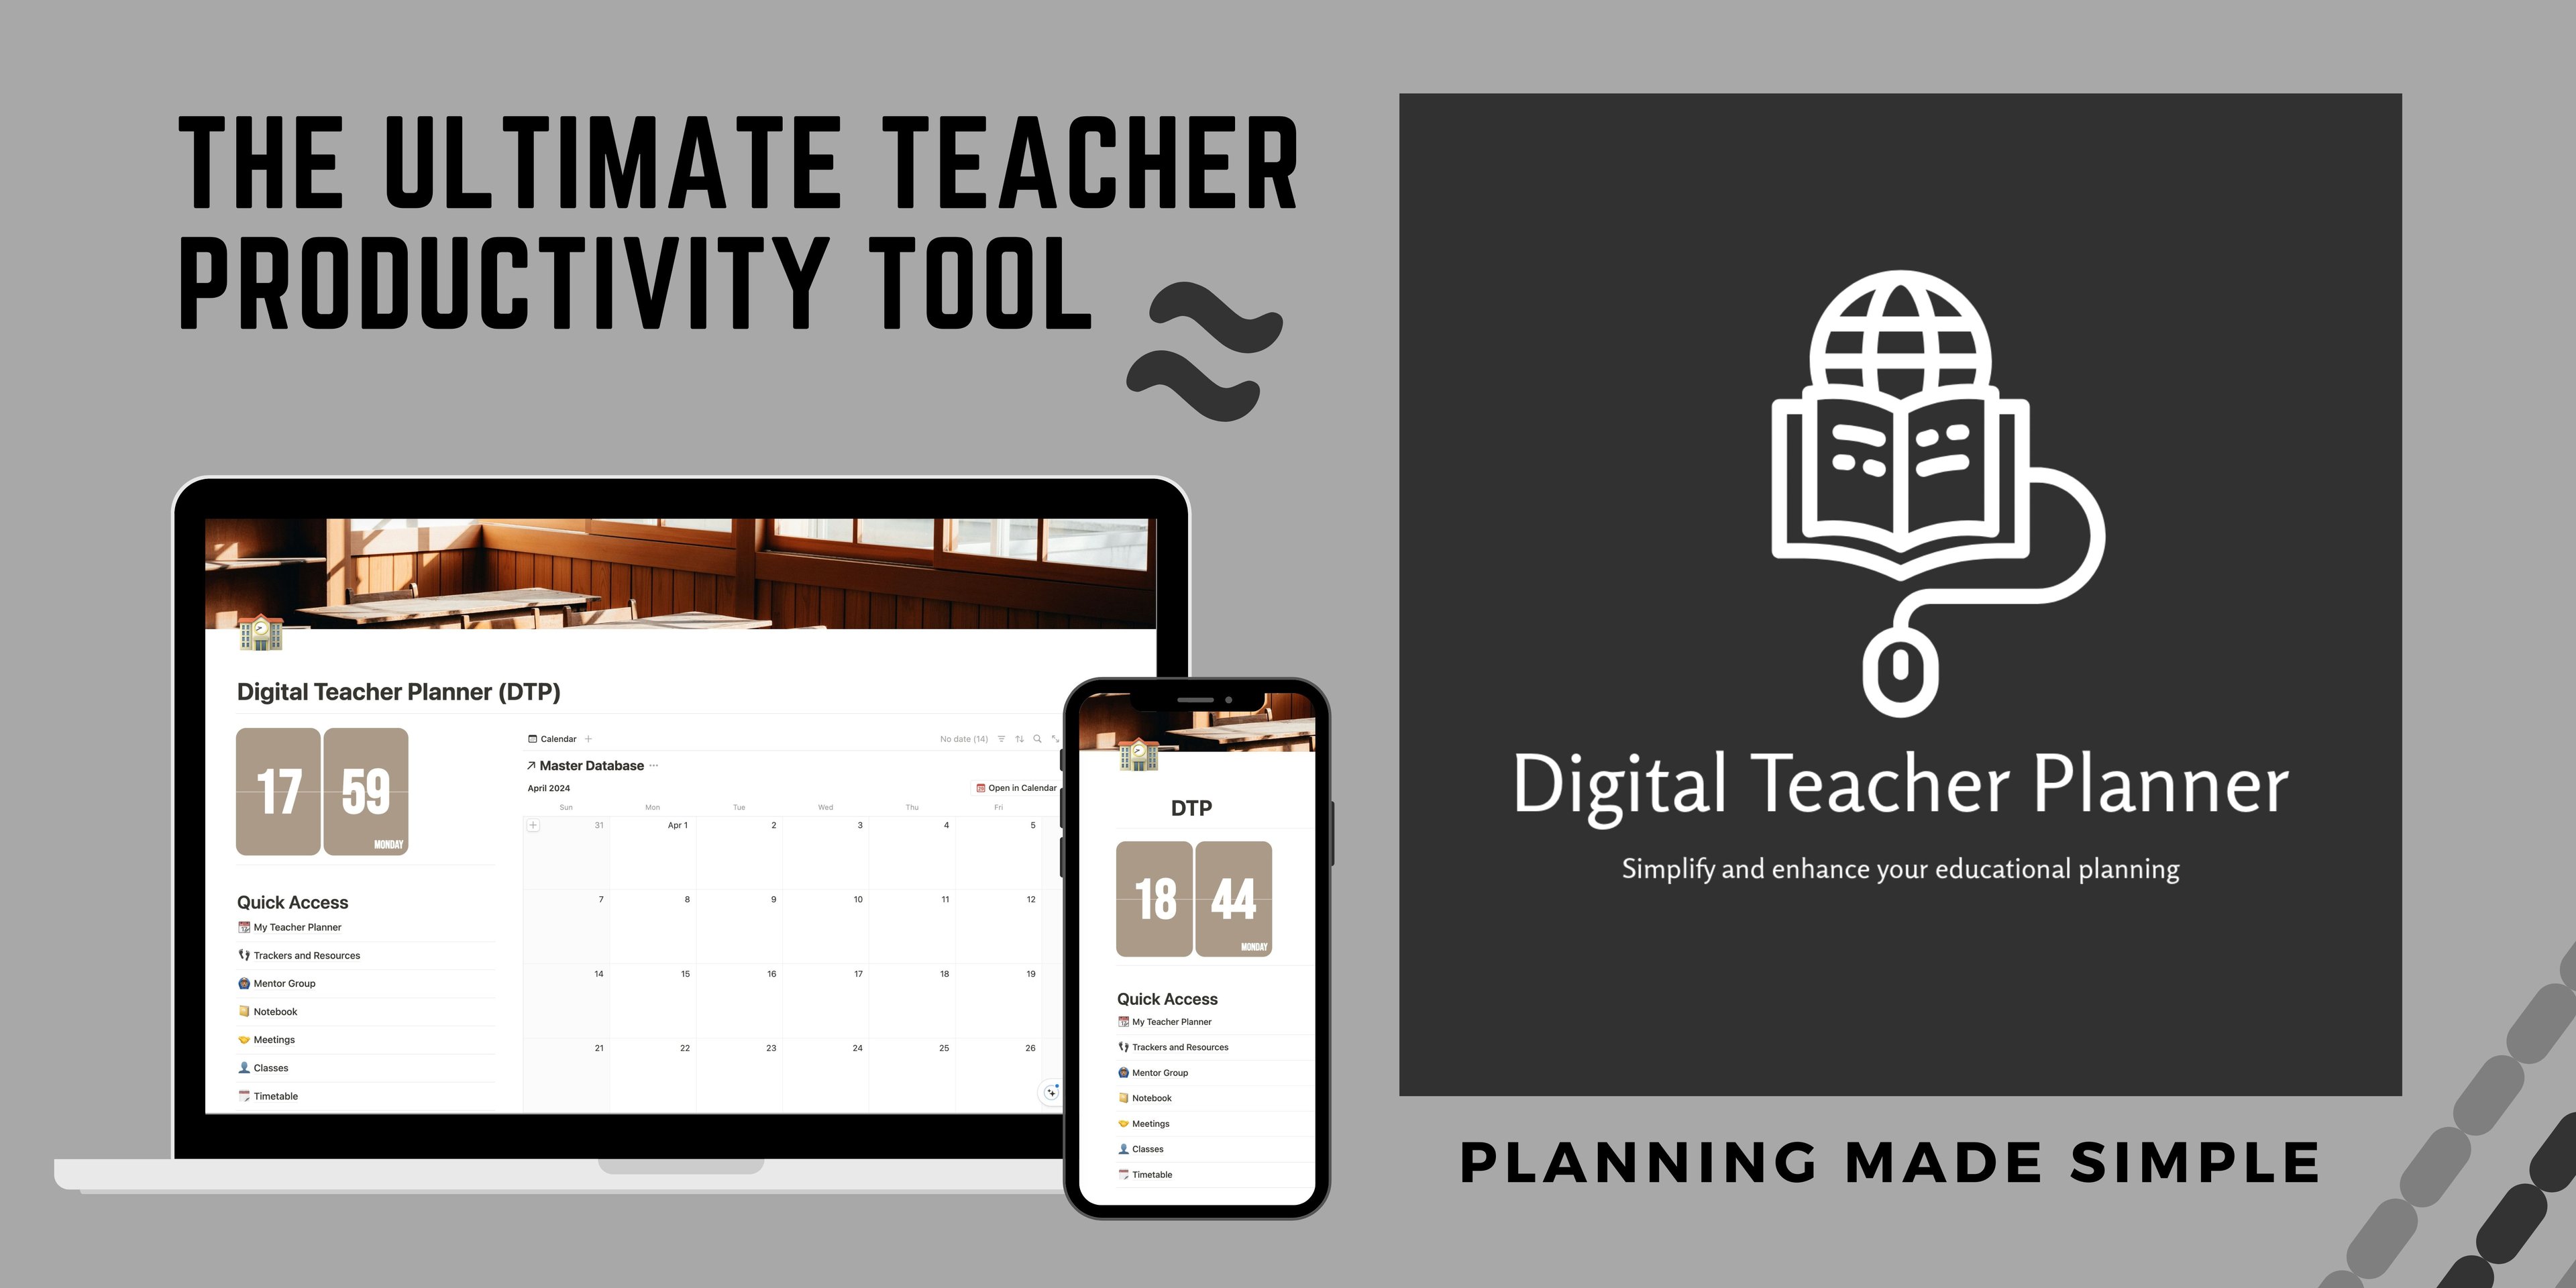 Simplify and enhance your educational planning